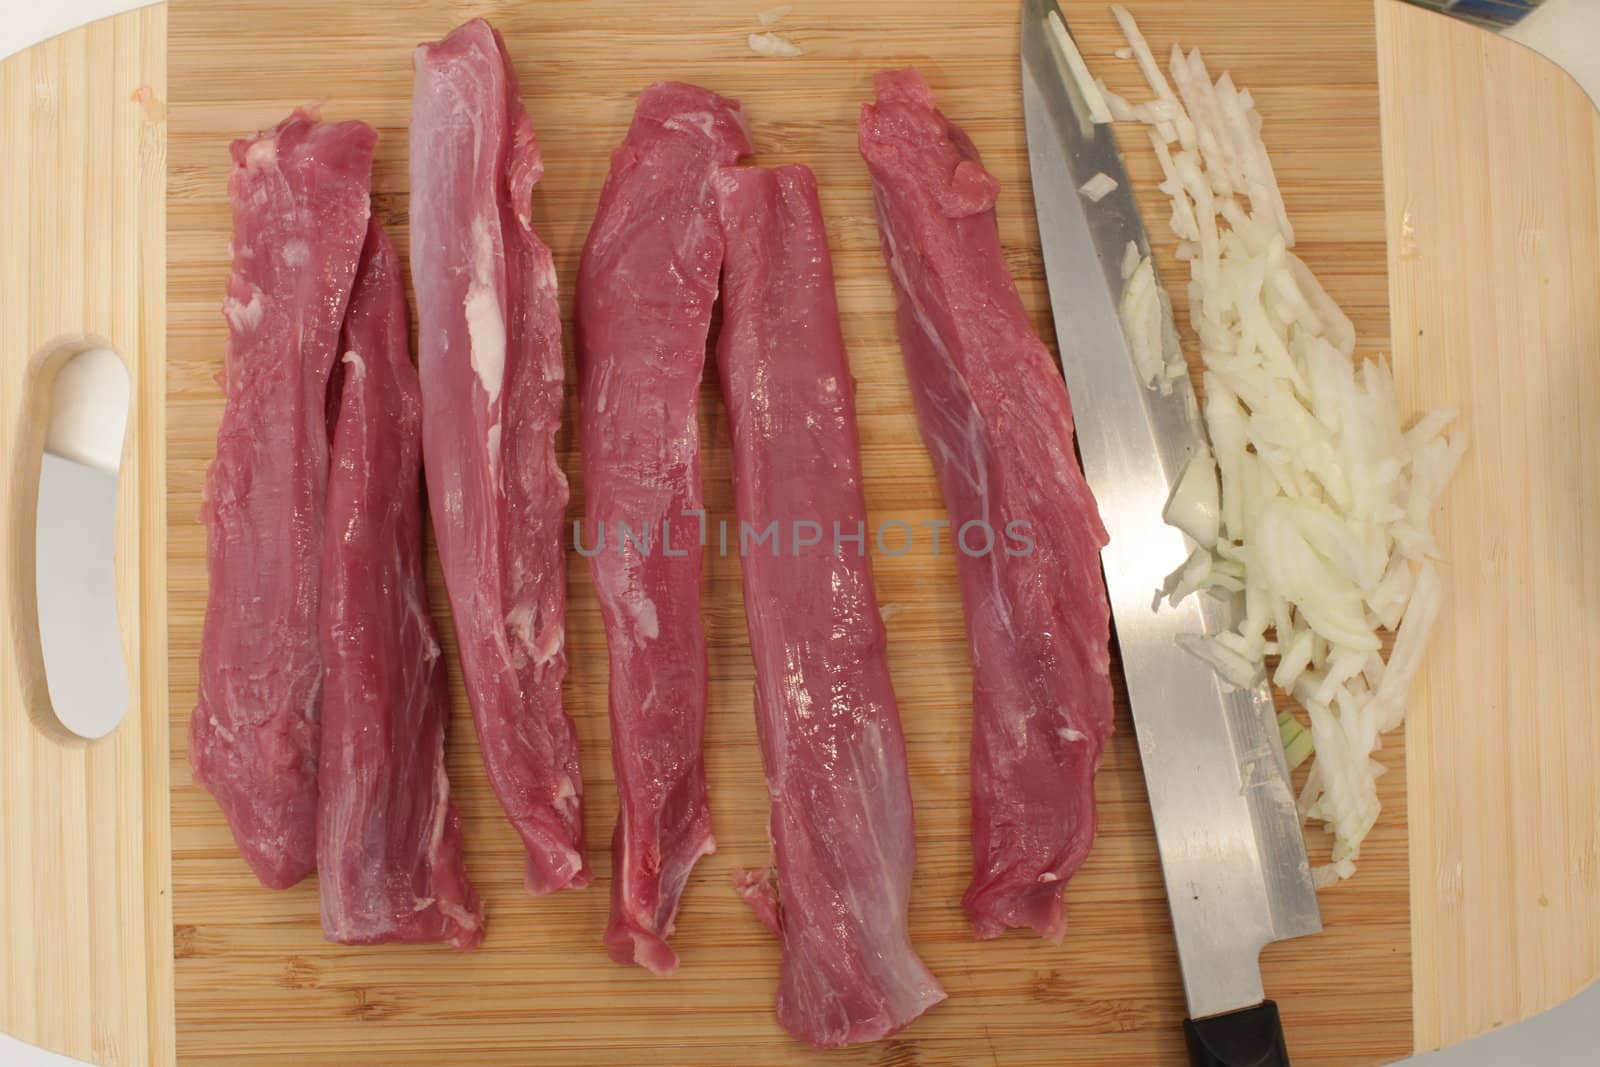 raw lamb on a wooden surface table